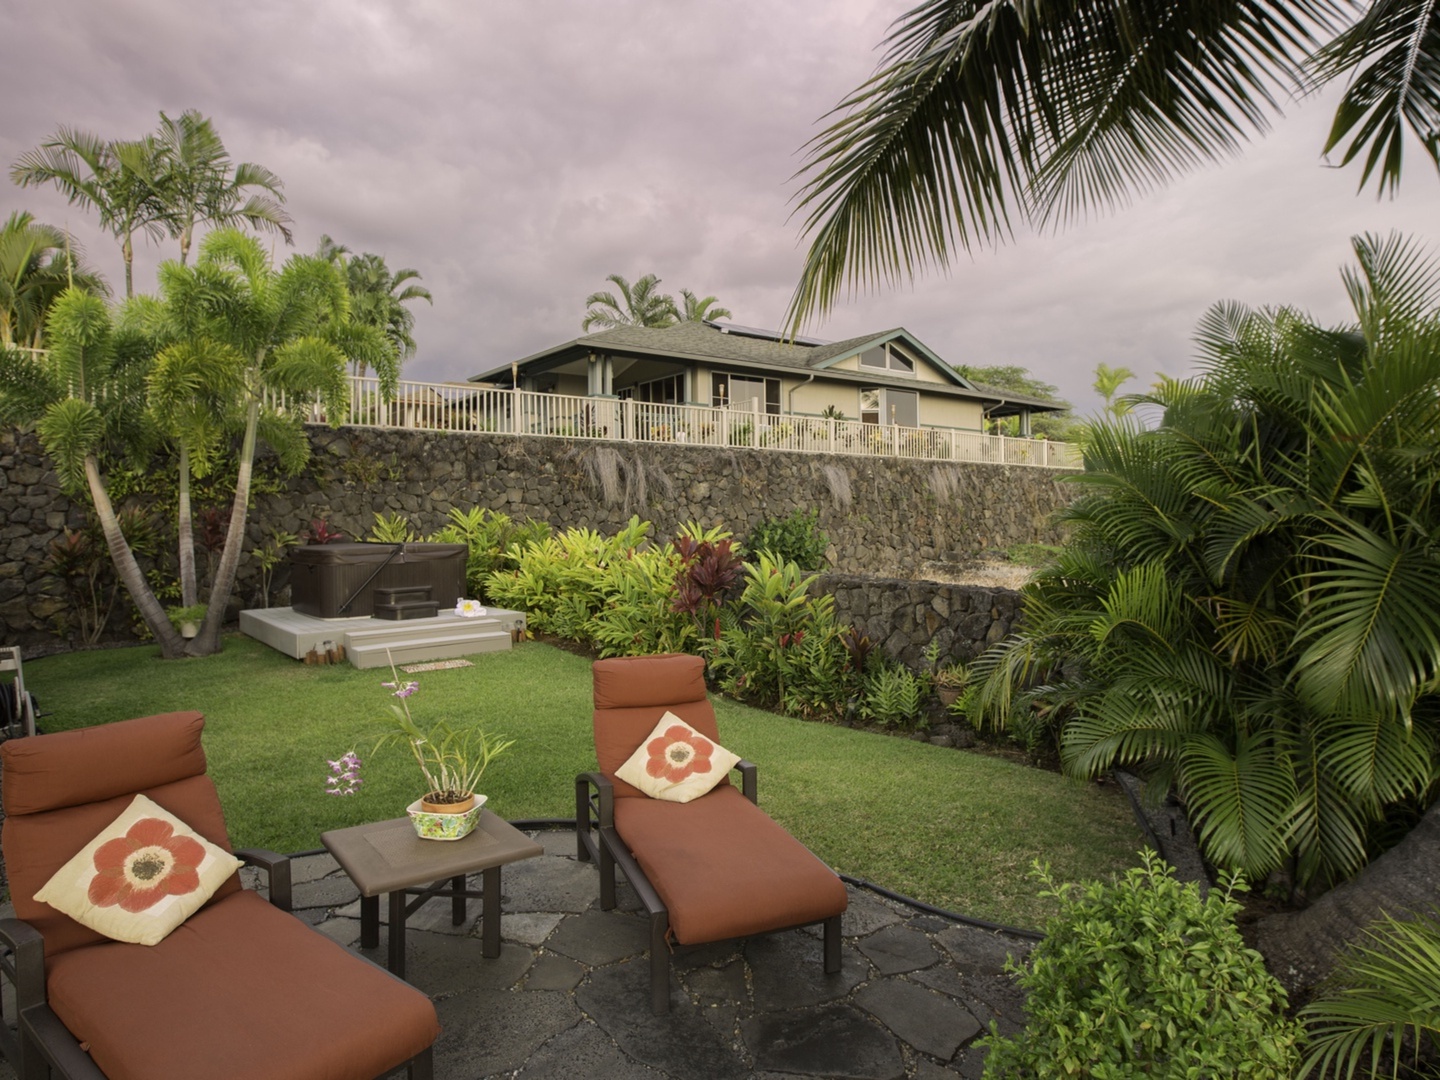 Kailua Kona Vacation Rentals, Hale Alaula - Ocean View - Relax in the outdoor lounge, offering panoramic vistas and serene ambiance.